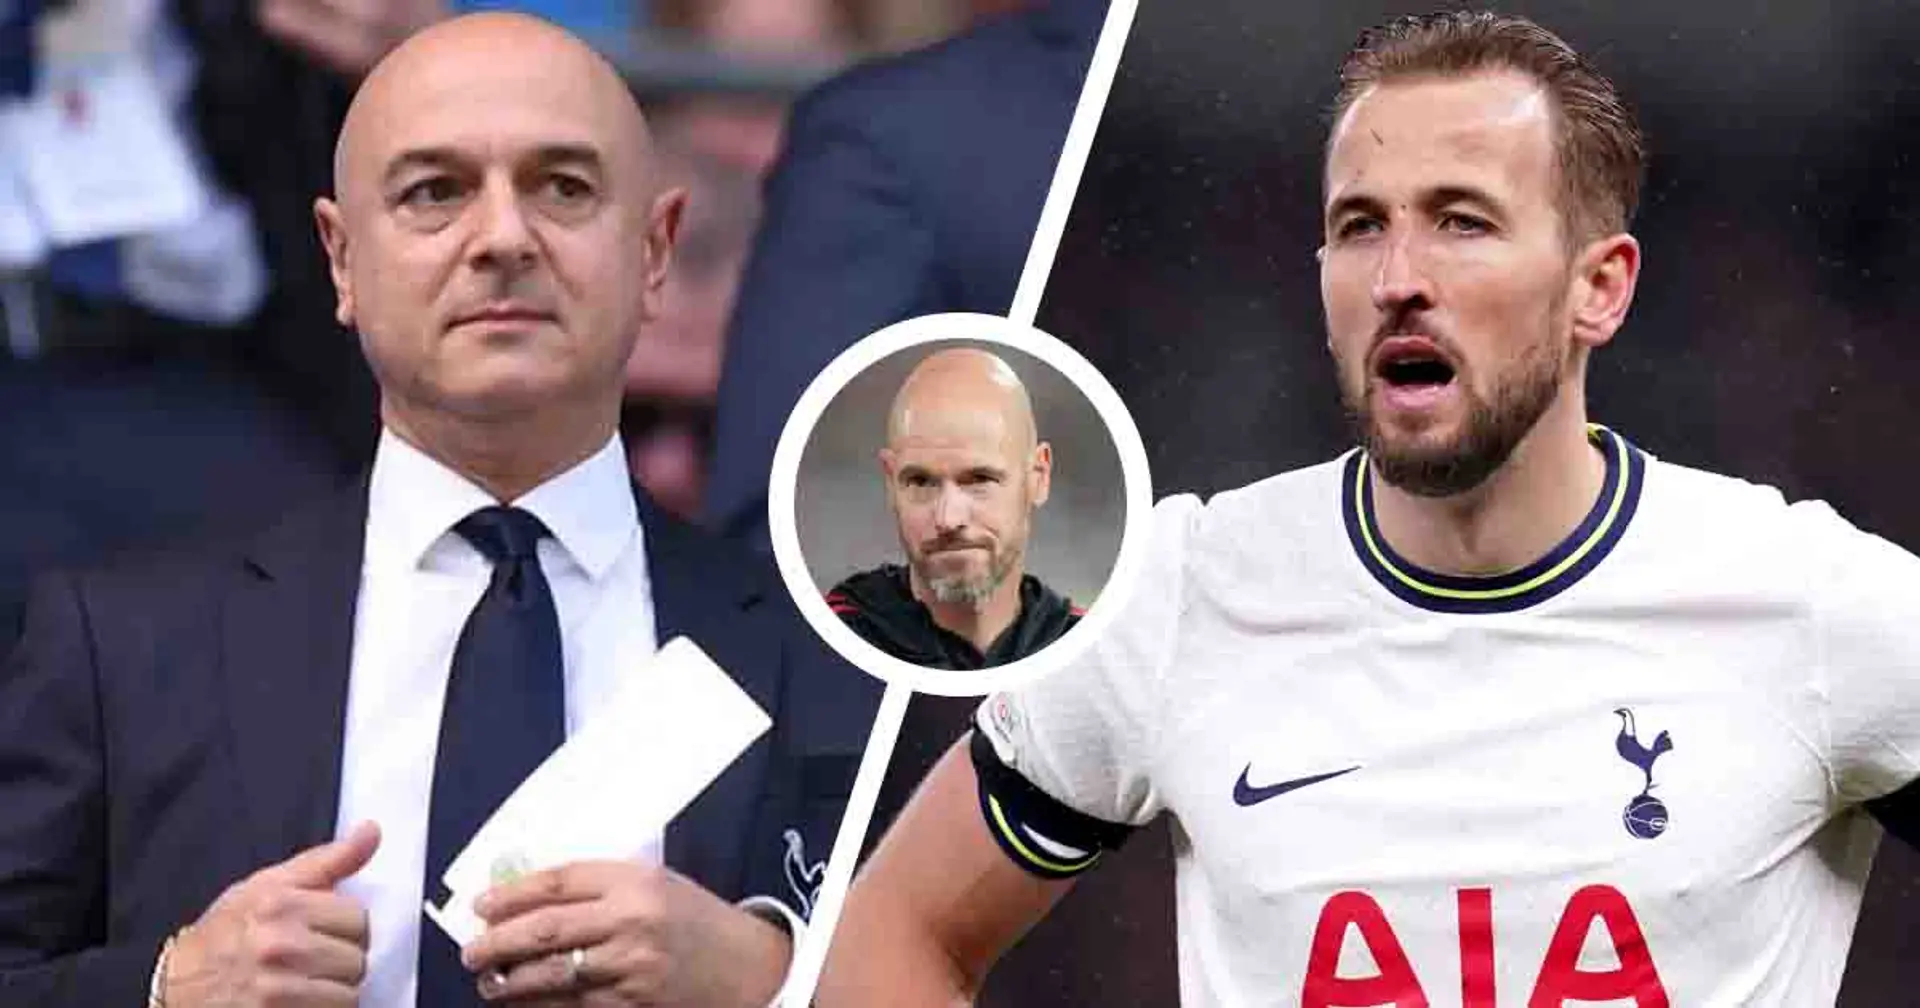 Man United face potential blow in Kane transfer pursuit due to Daniel Levy decision (reliability: 4 stars)